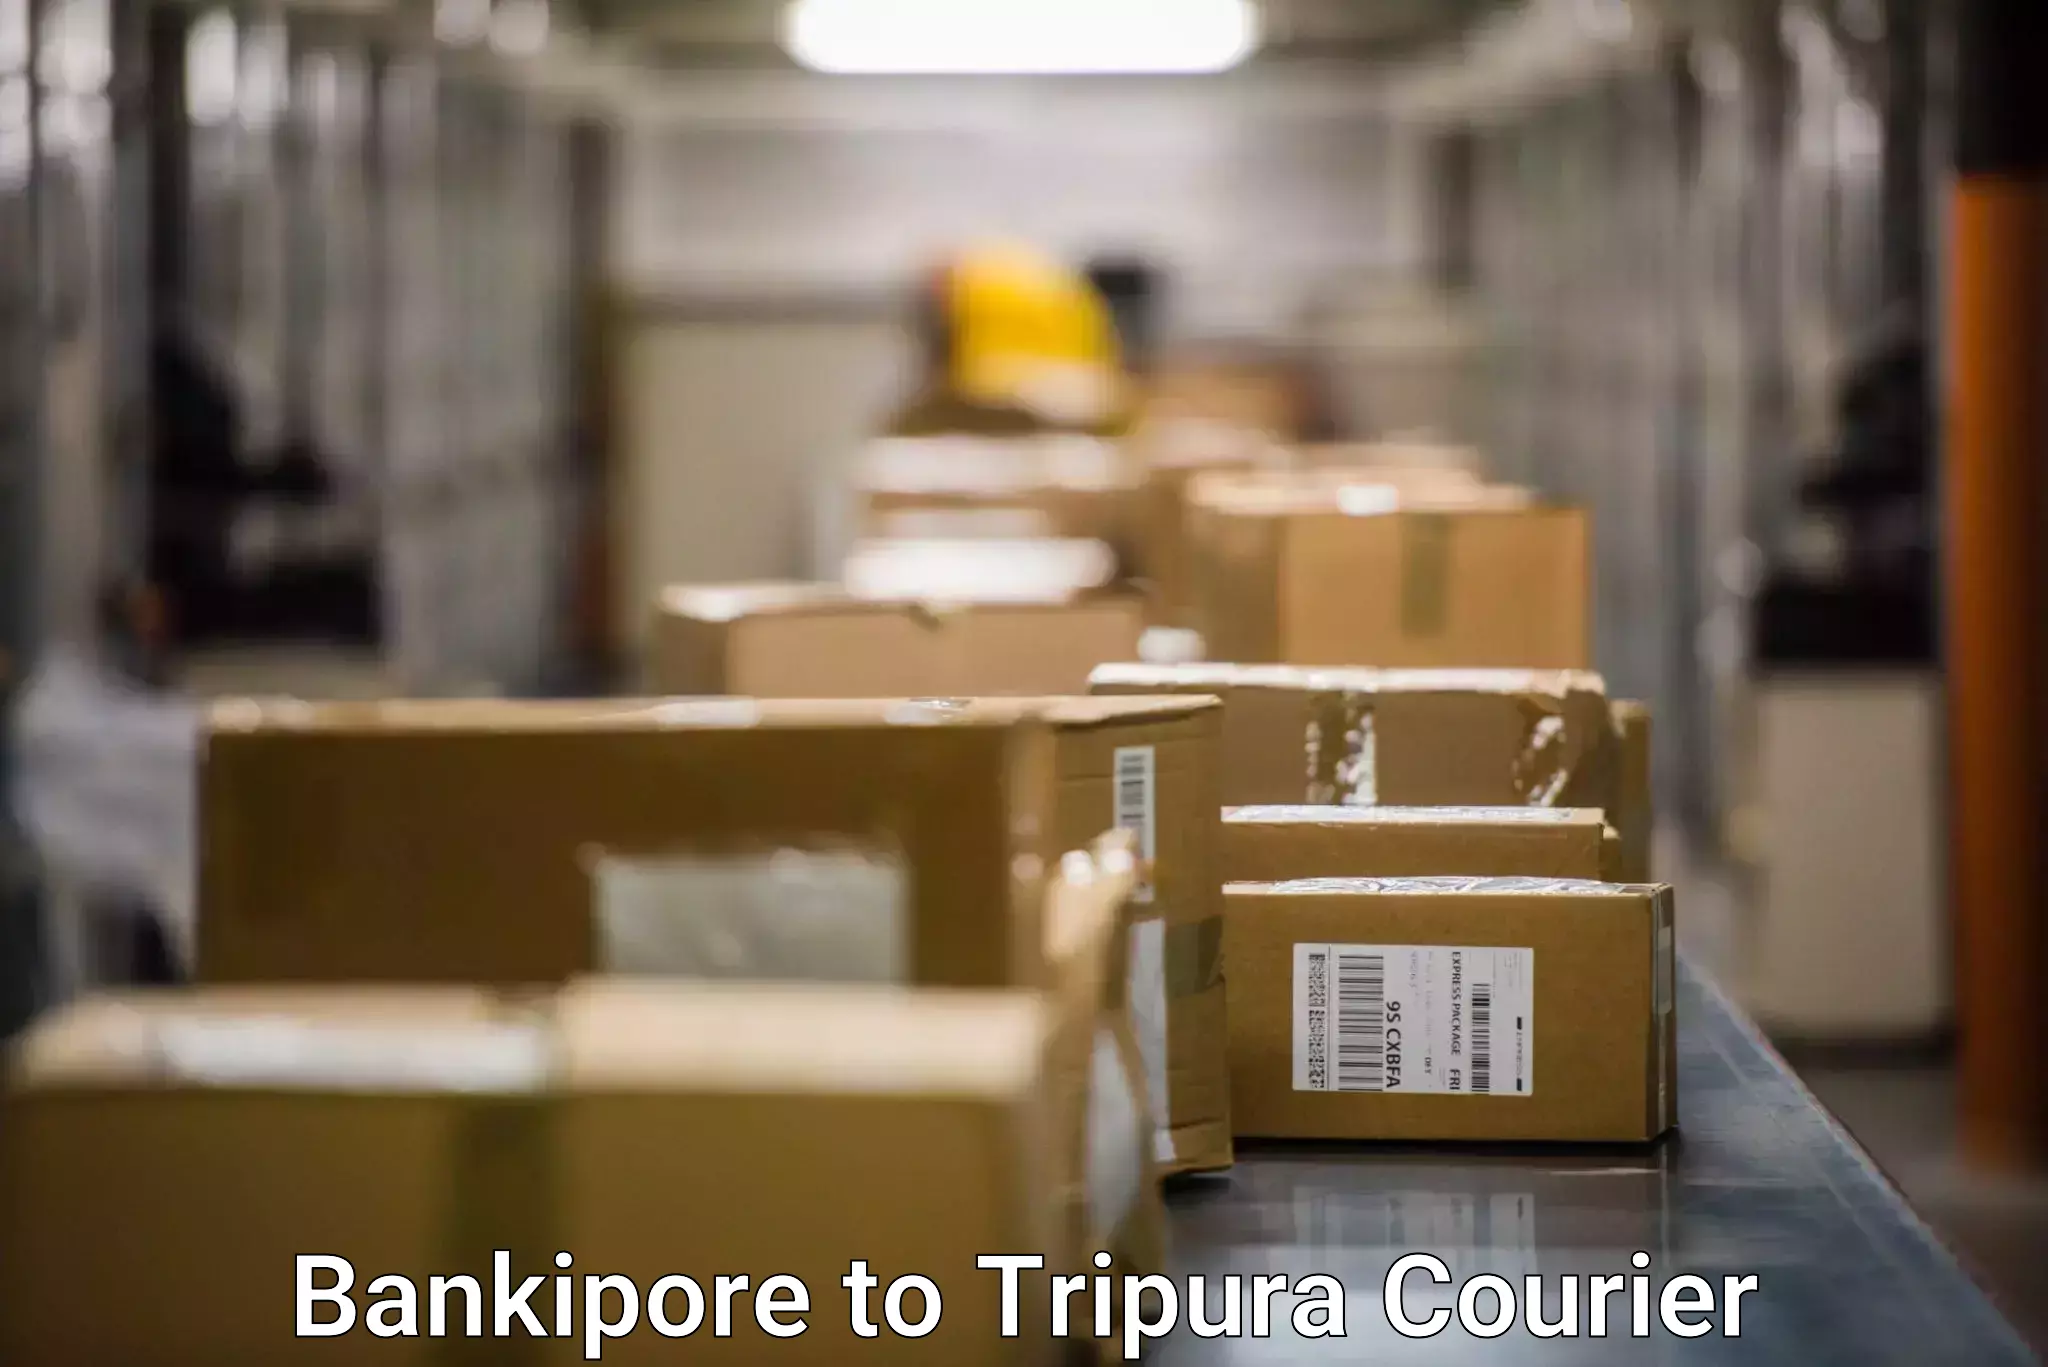 End-to-end delivery Bankipore to Udaipur Tripura